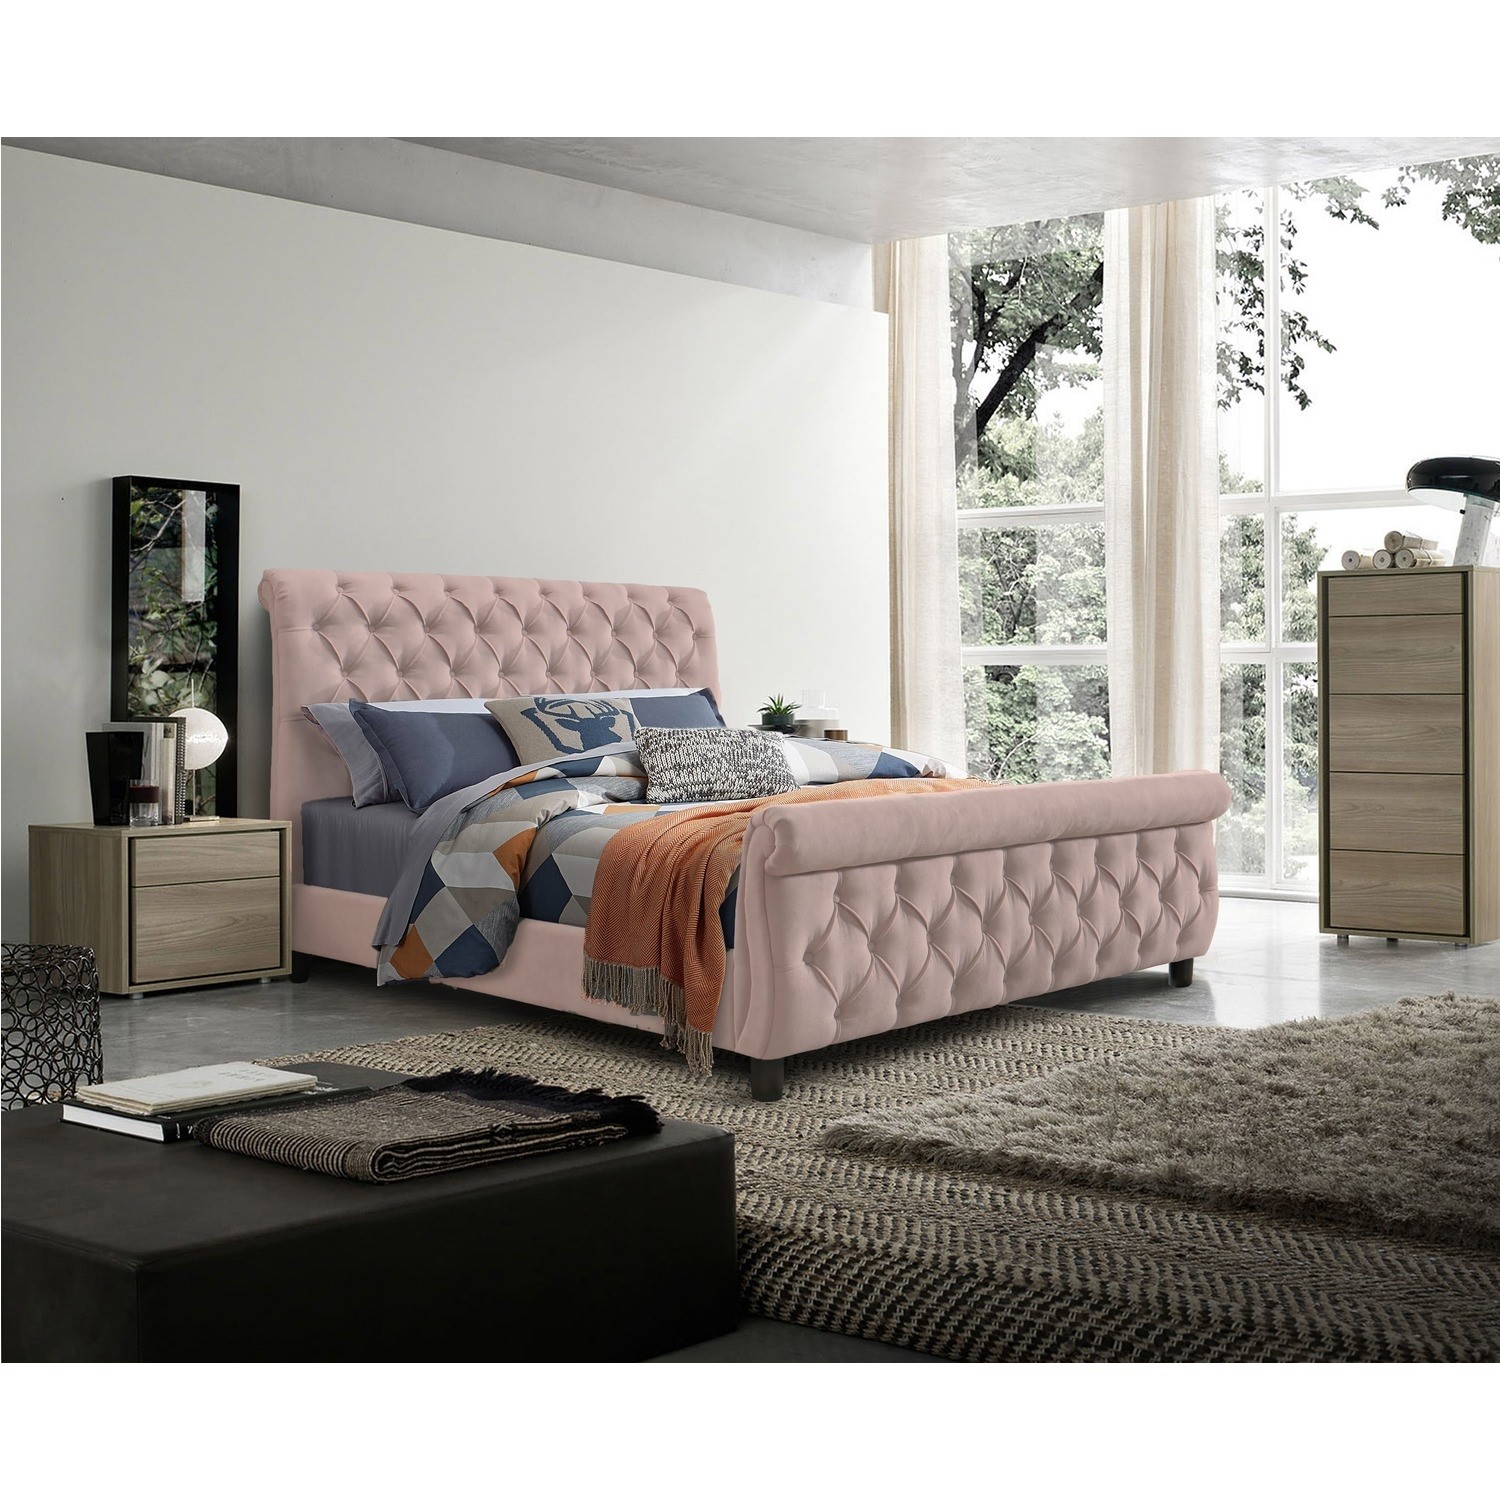 Anna Scroll Headboard And Footboard, Super King Size Bed Dimensions Bedding Uk